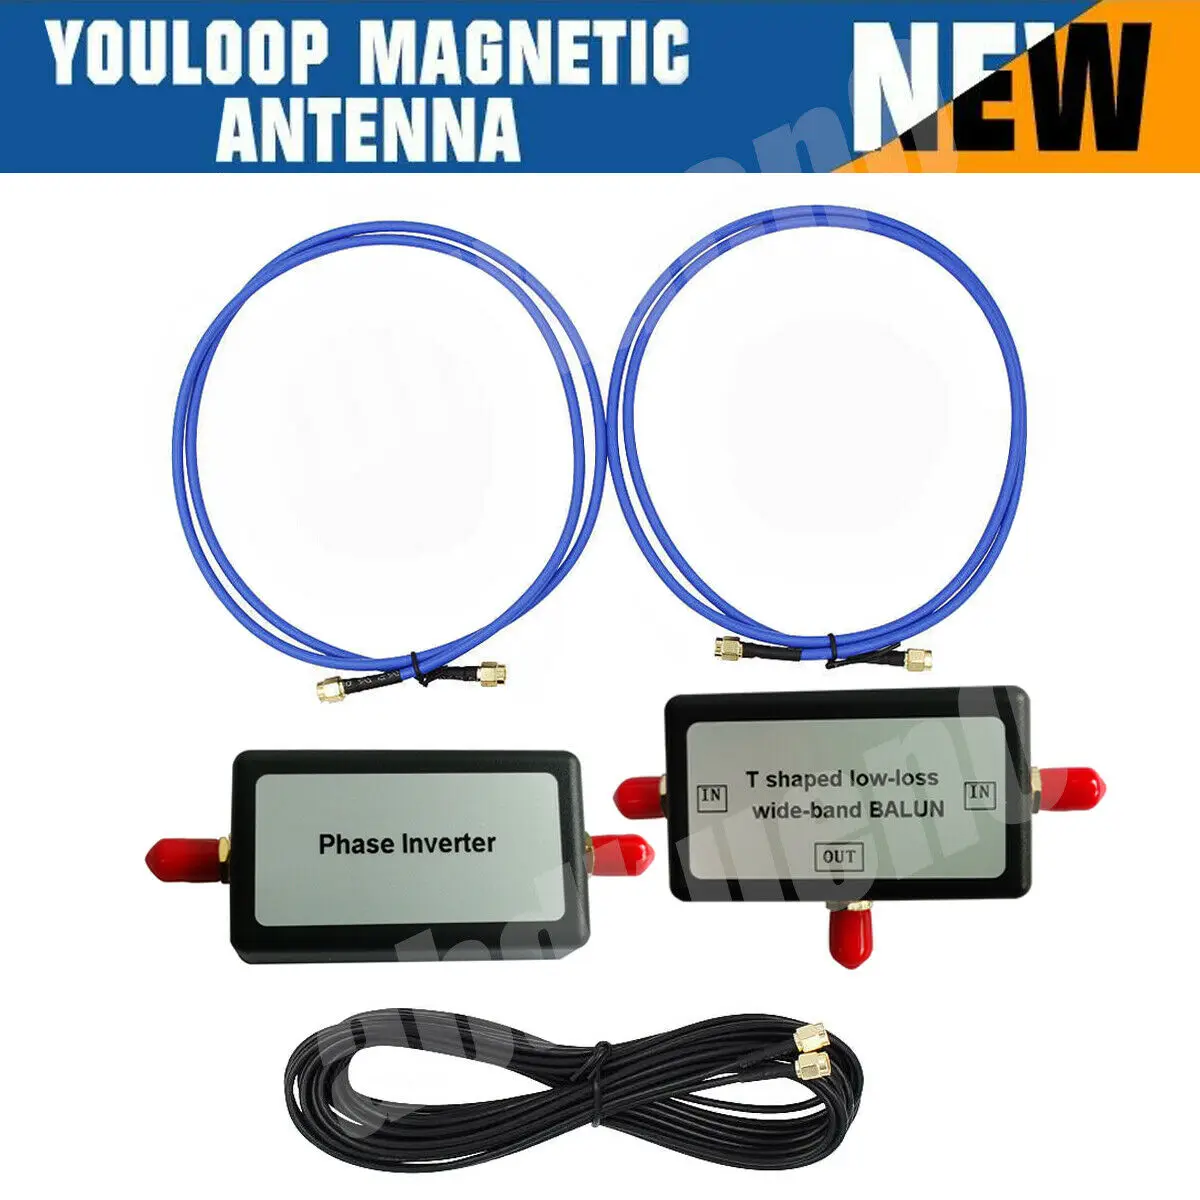 

YouLoop Magnetic Antenna Portable Passive Magnetic Loop Antenna with Low Loss Broadband BALUN for HF and VHF